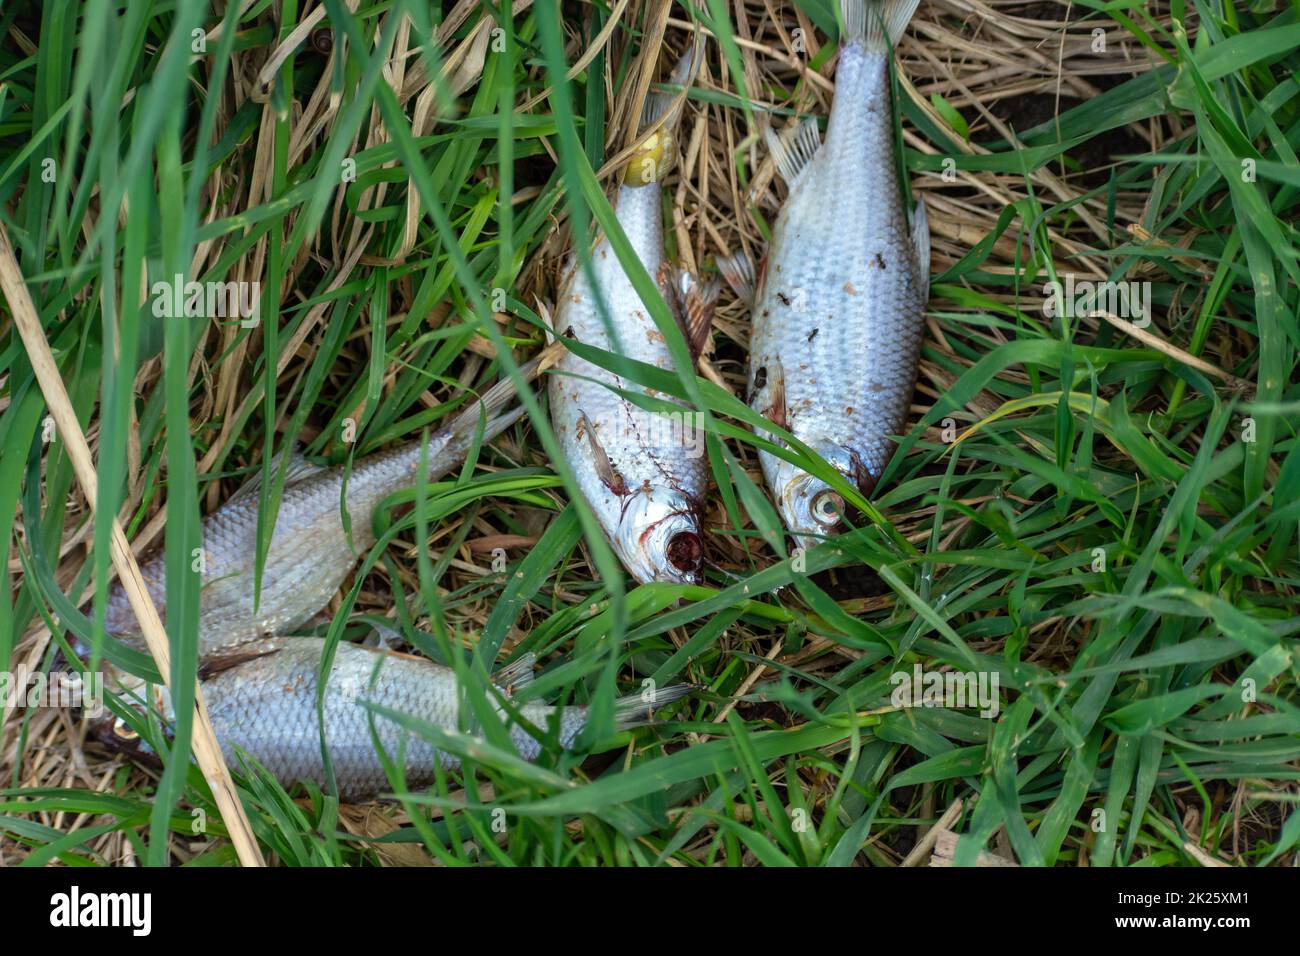 Dead small fish lying in the grass Stock Photo